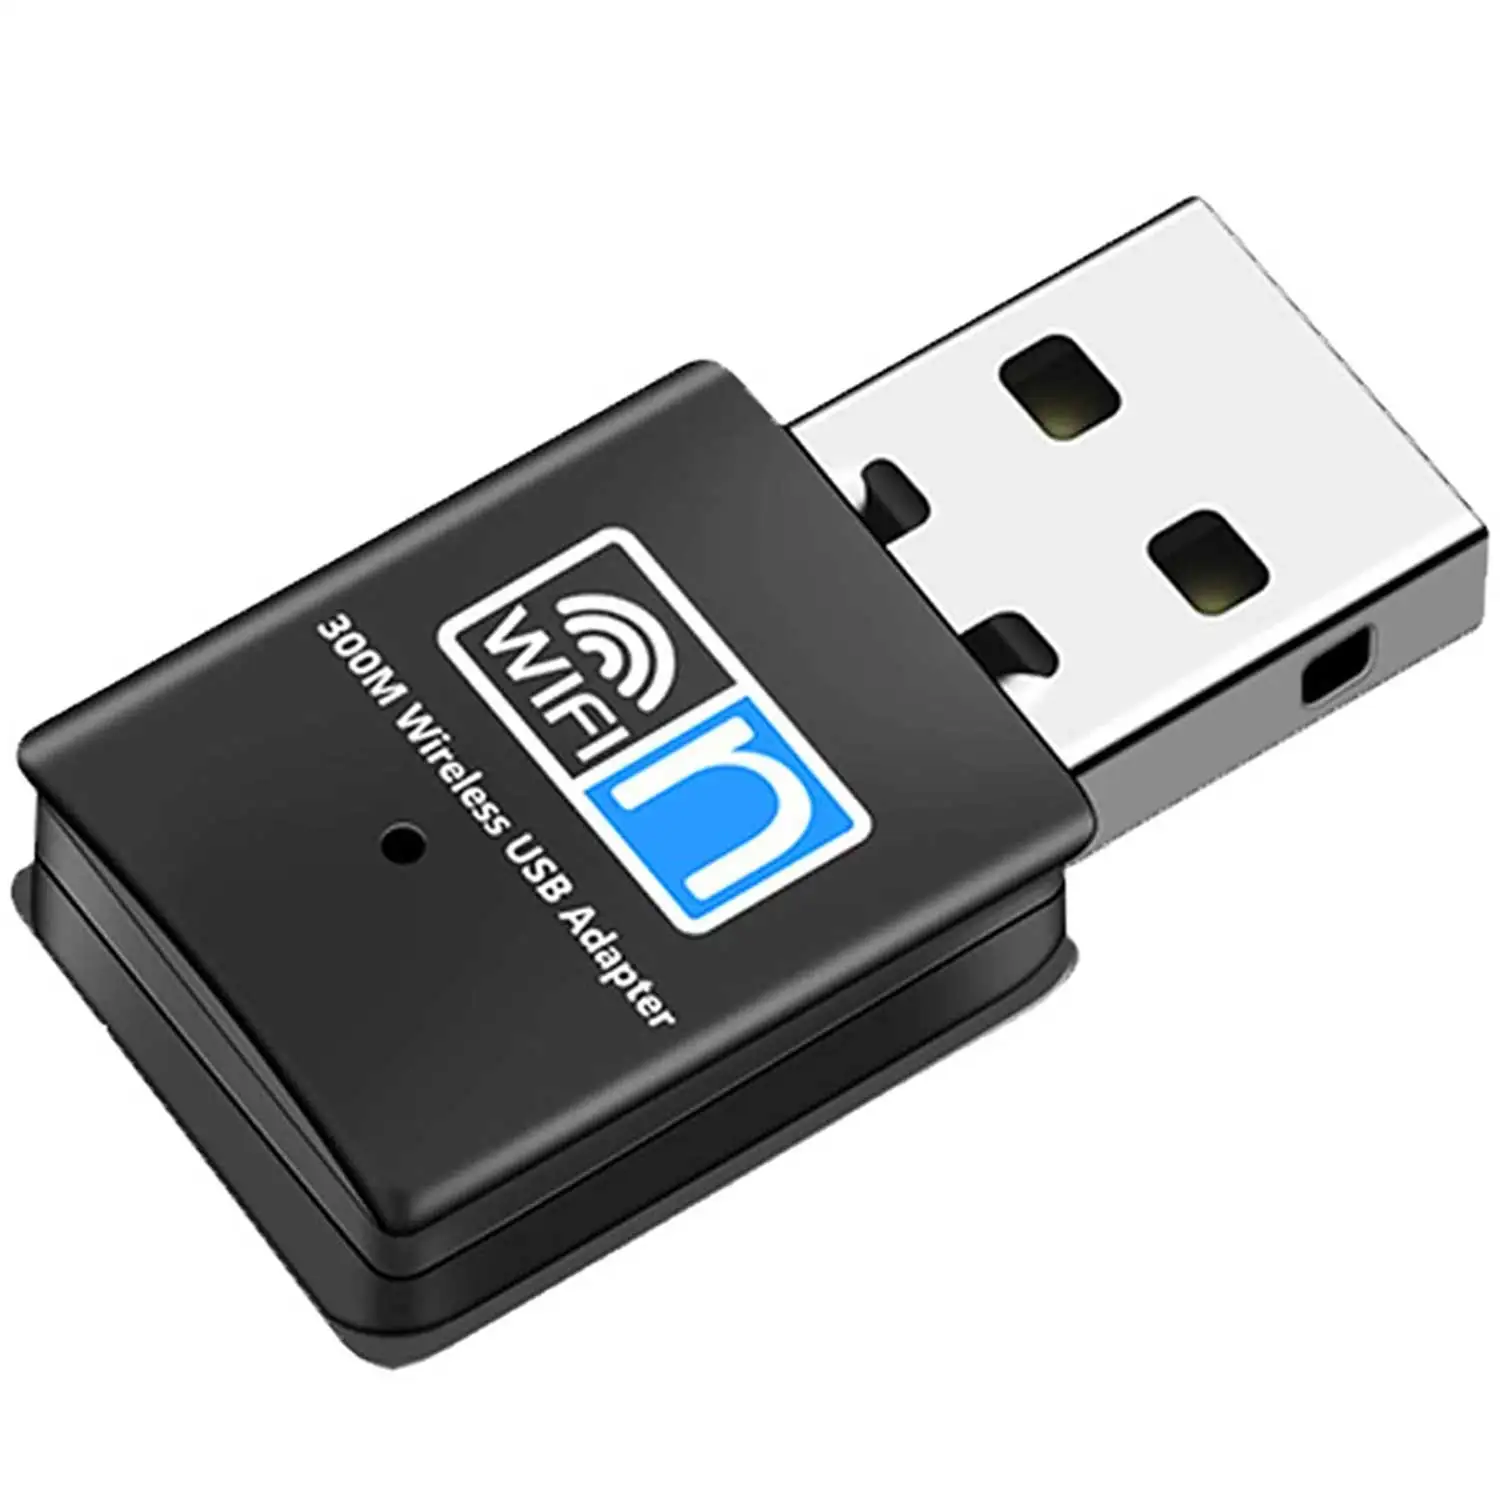 

Original 150Mbps Alfa Awus036H High Power Usb New Rt3070 Chipset Wireless Usb Wifi Adapter